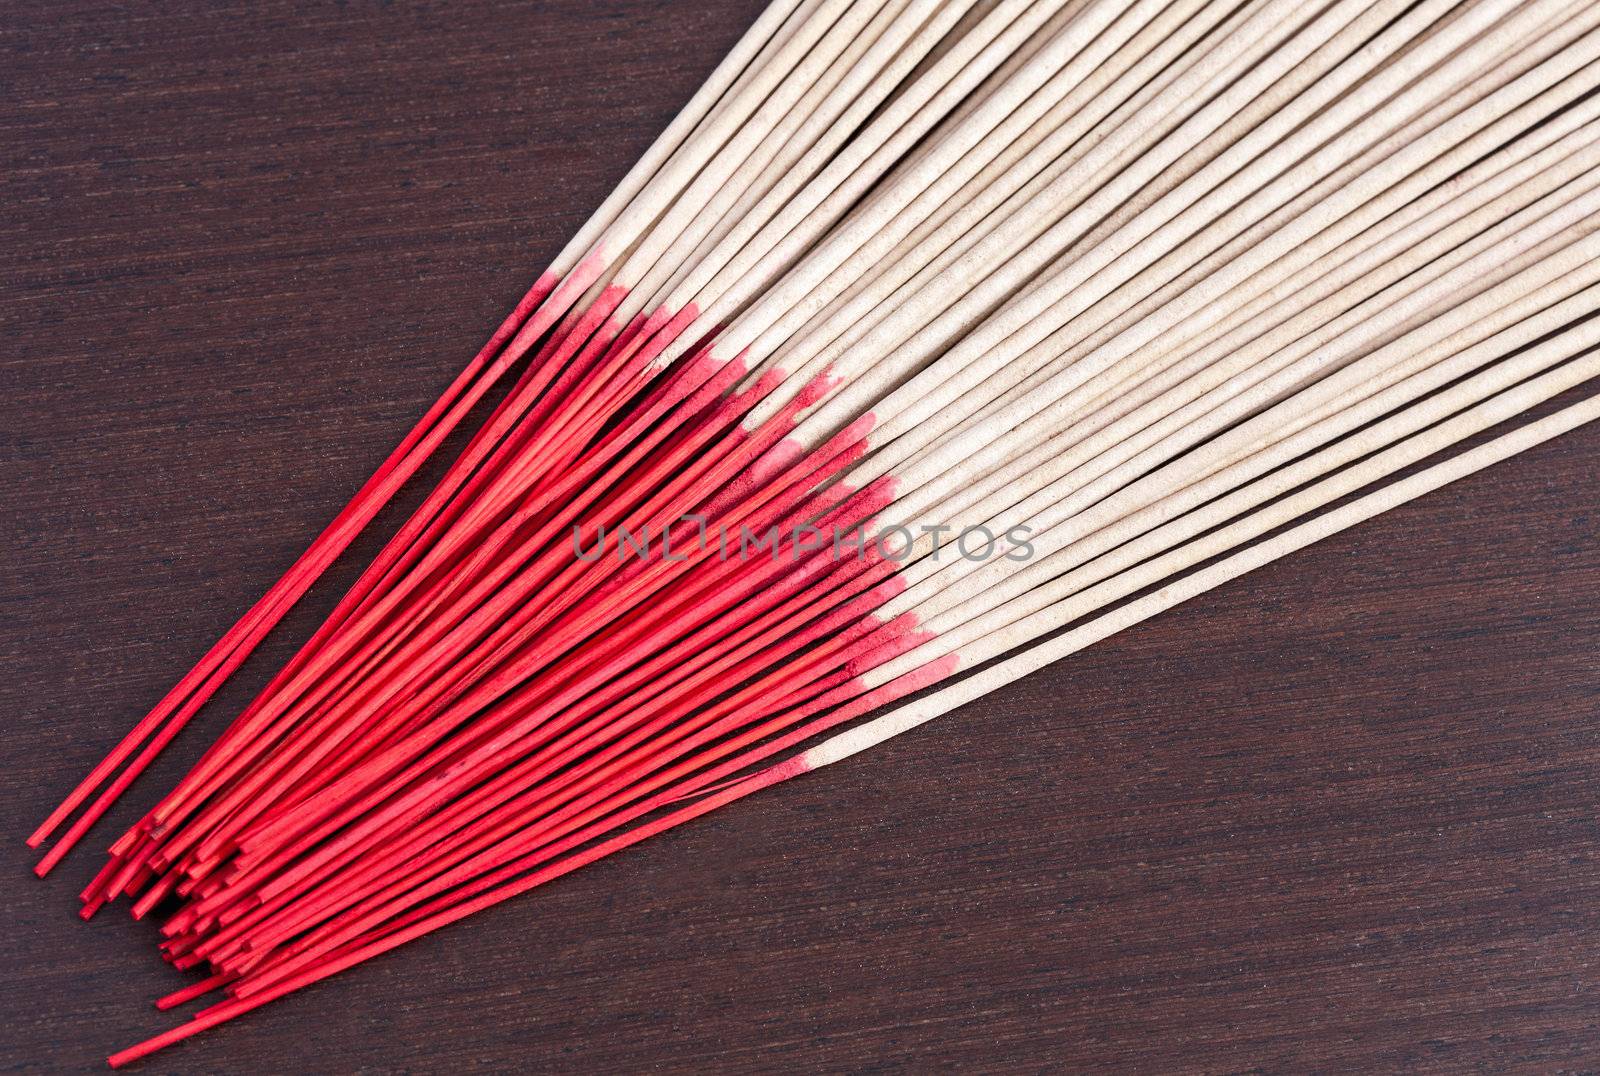 Incense aromatic sticks on the wooden background by sfinks